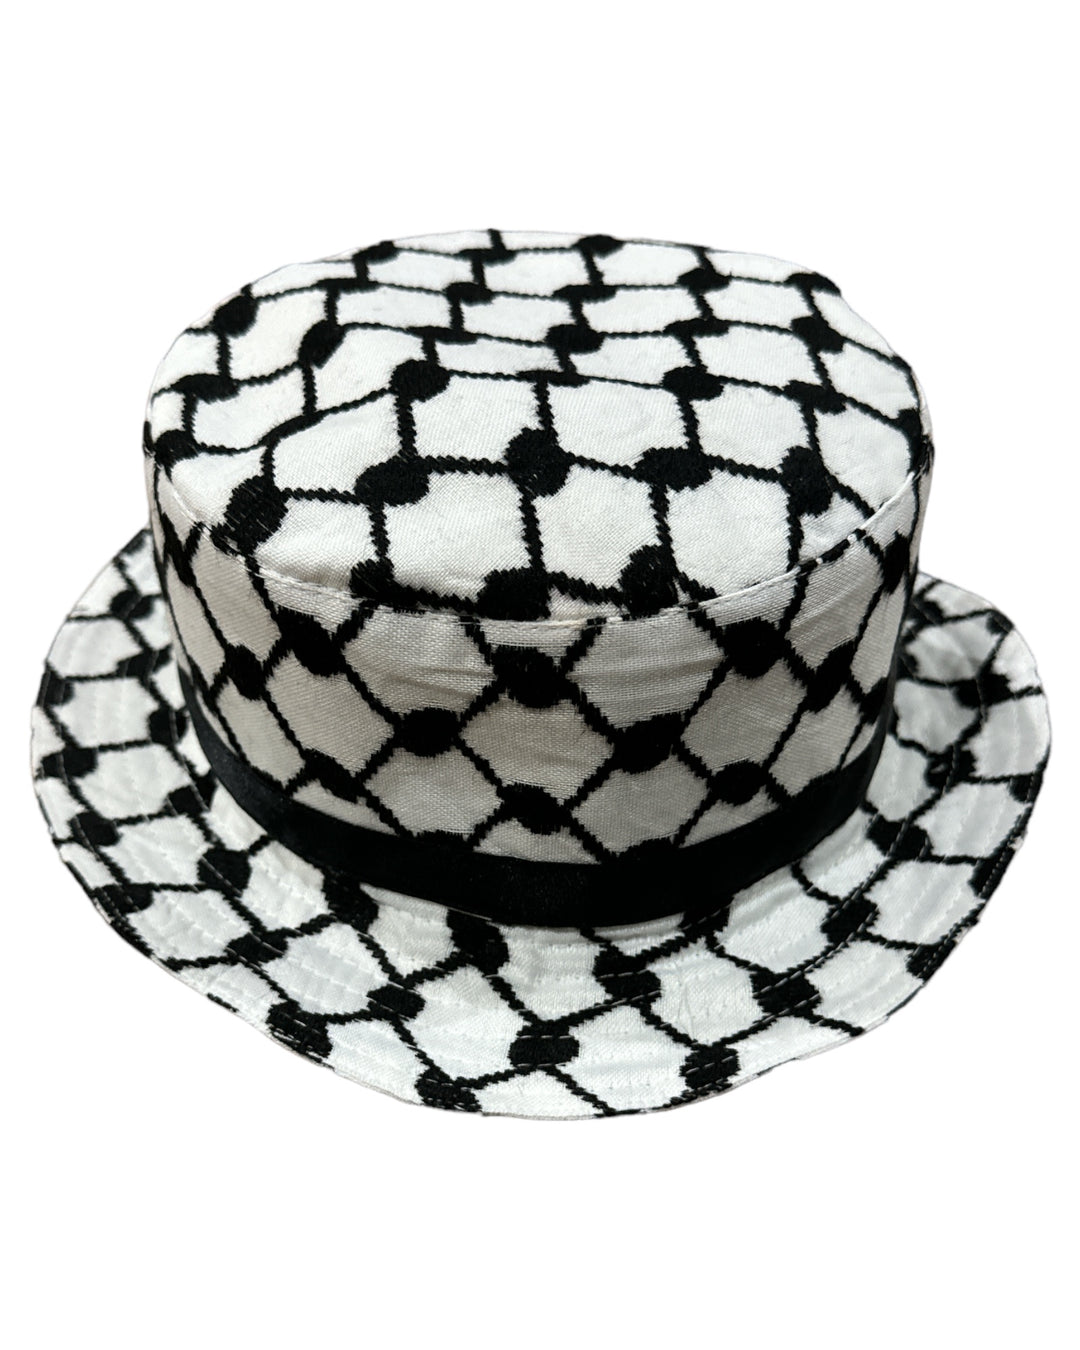 Authentic Keffiyeh Bucket Hats: Tradition Meets Trend (HAND MADE)